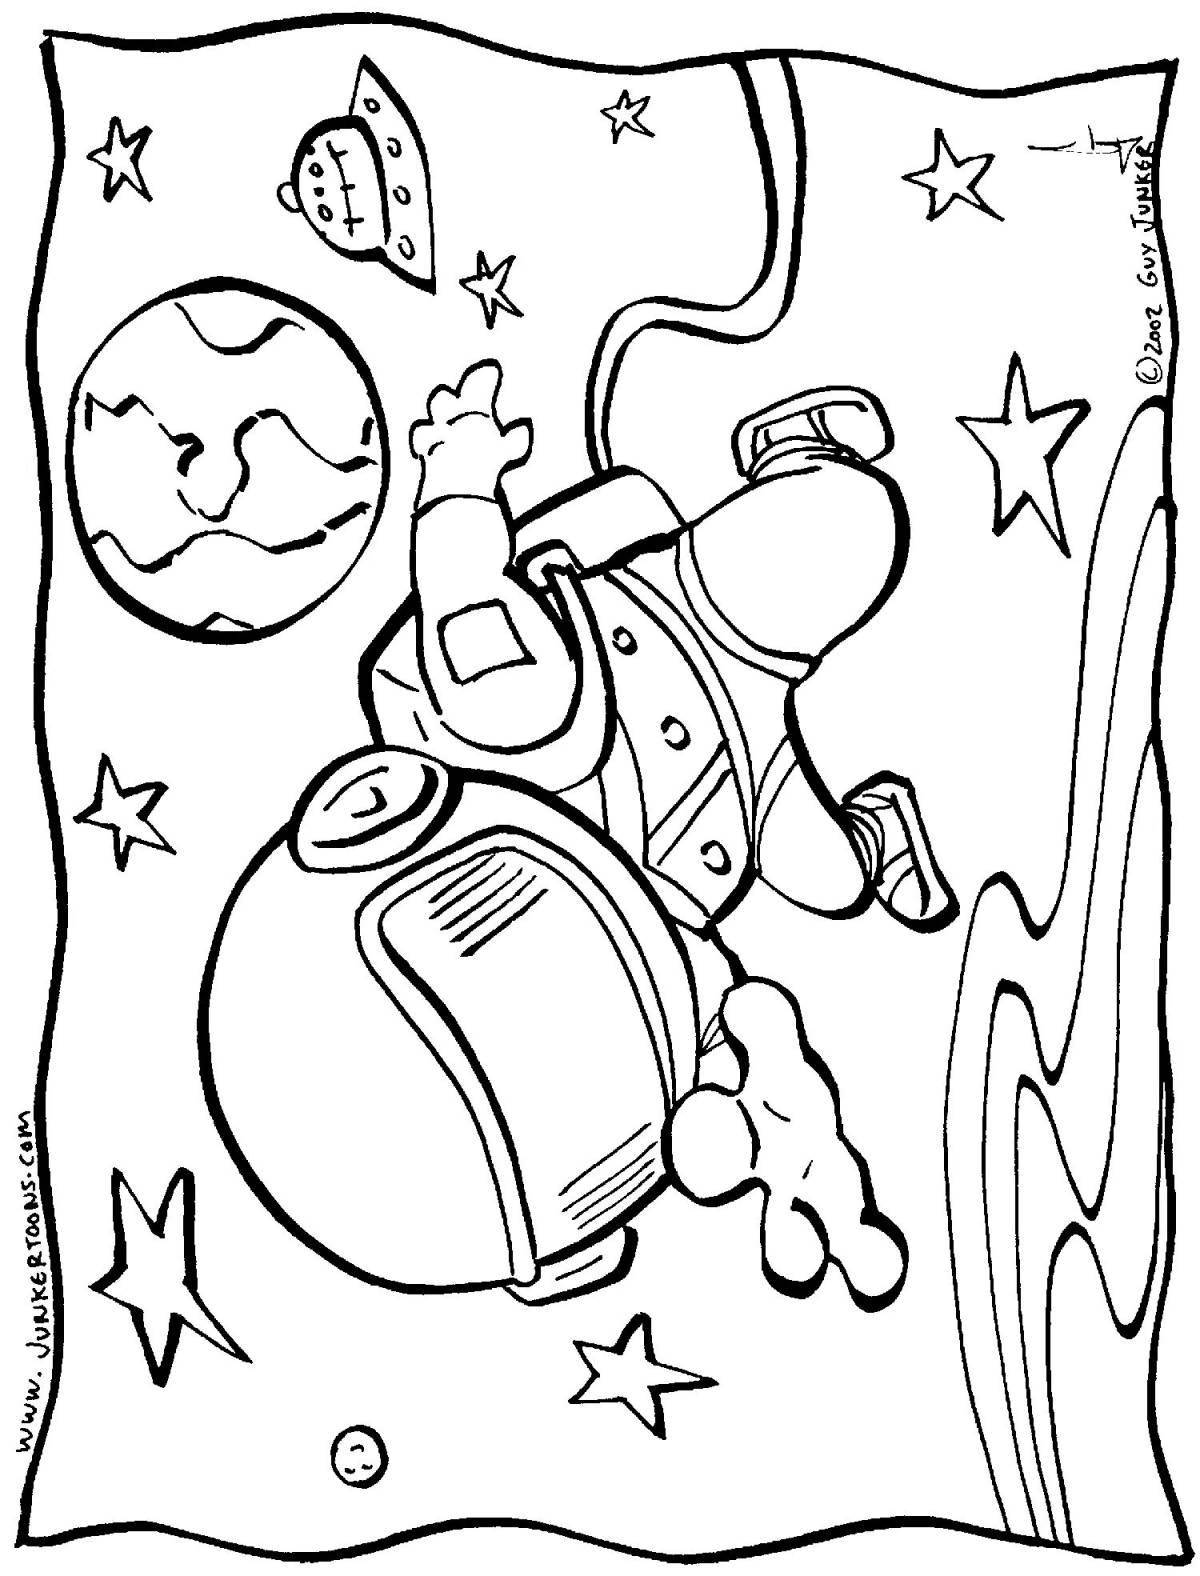 Coloring page great cosmonautics day